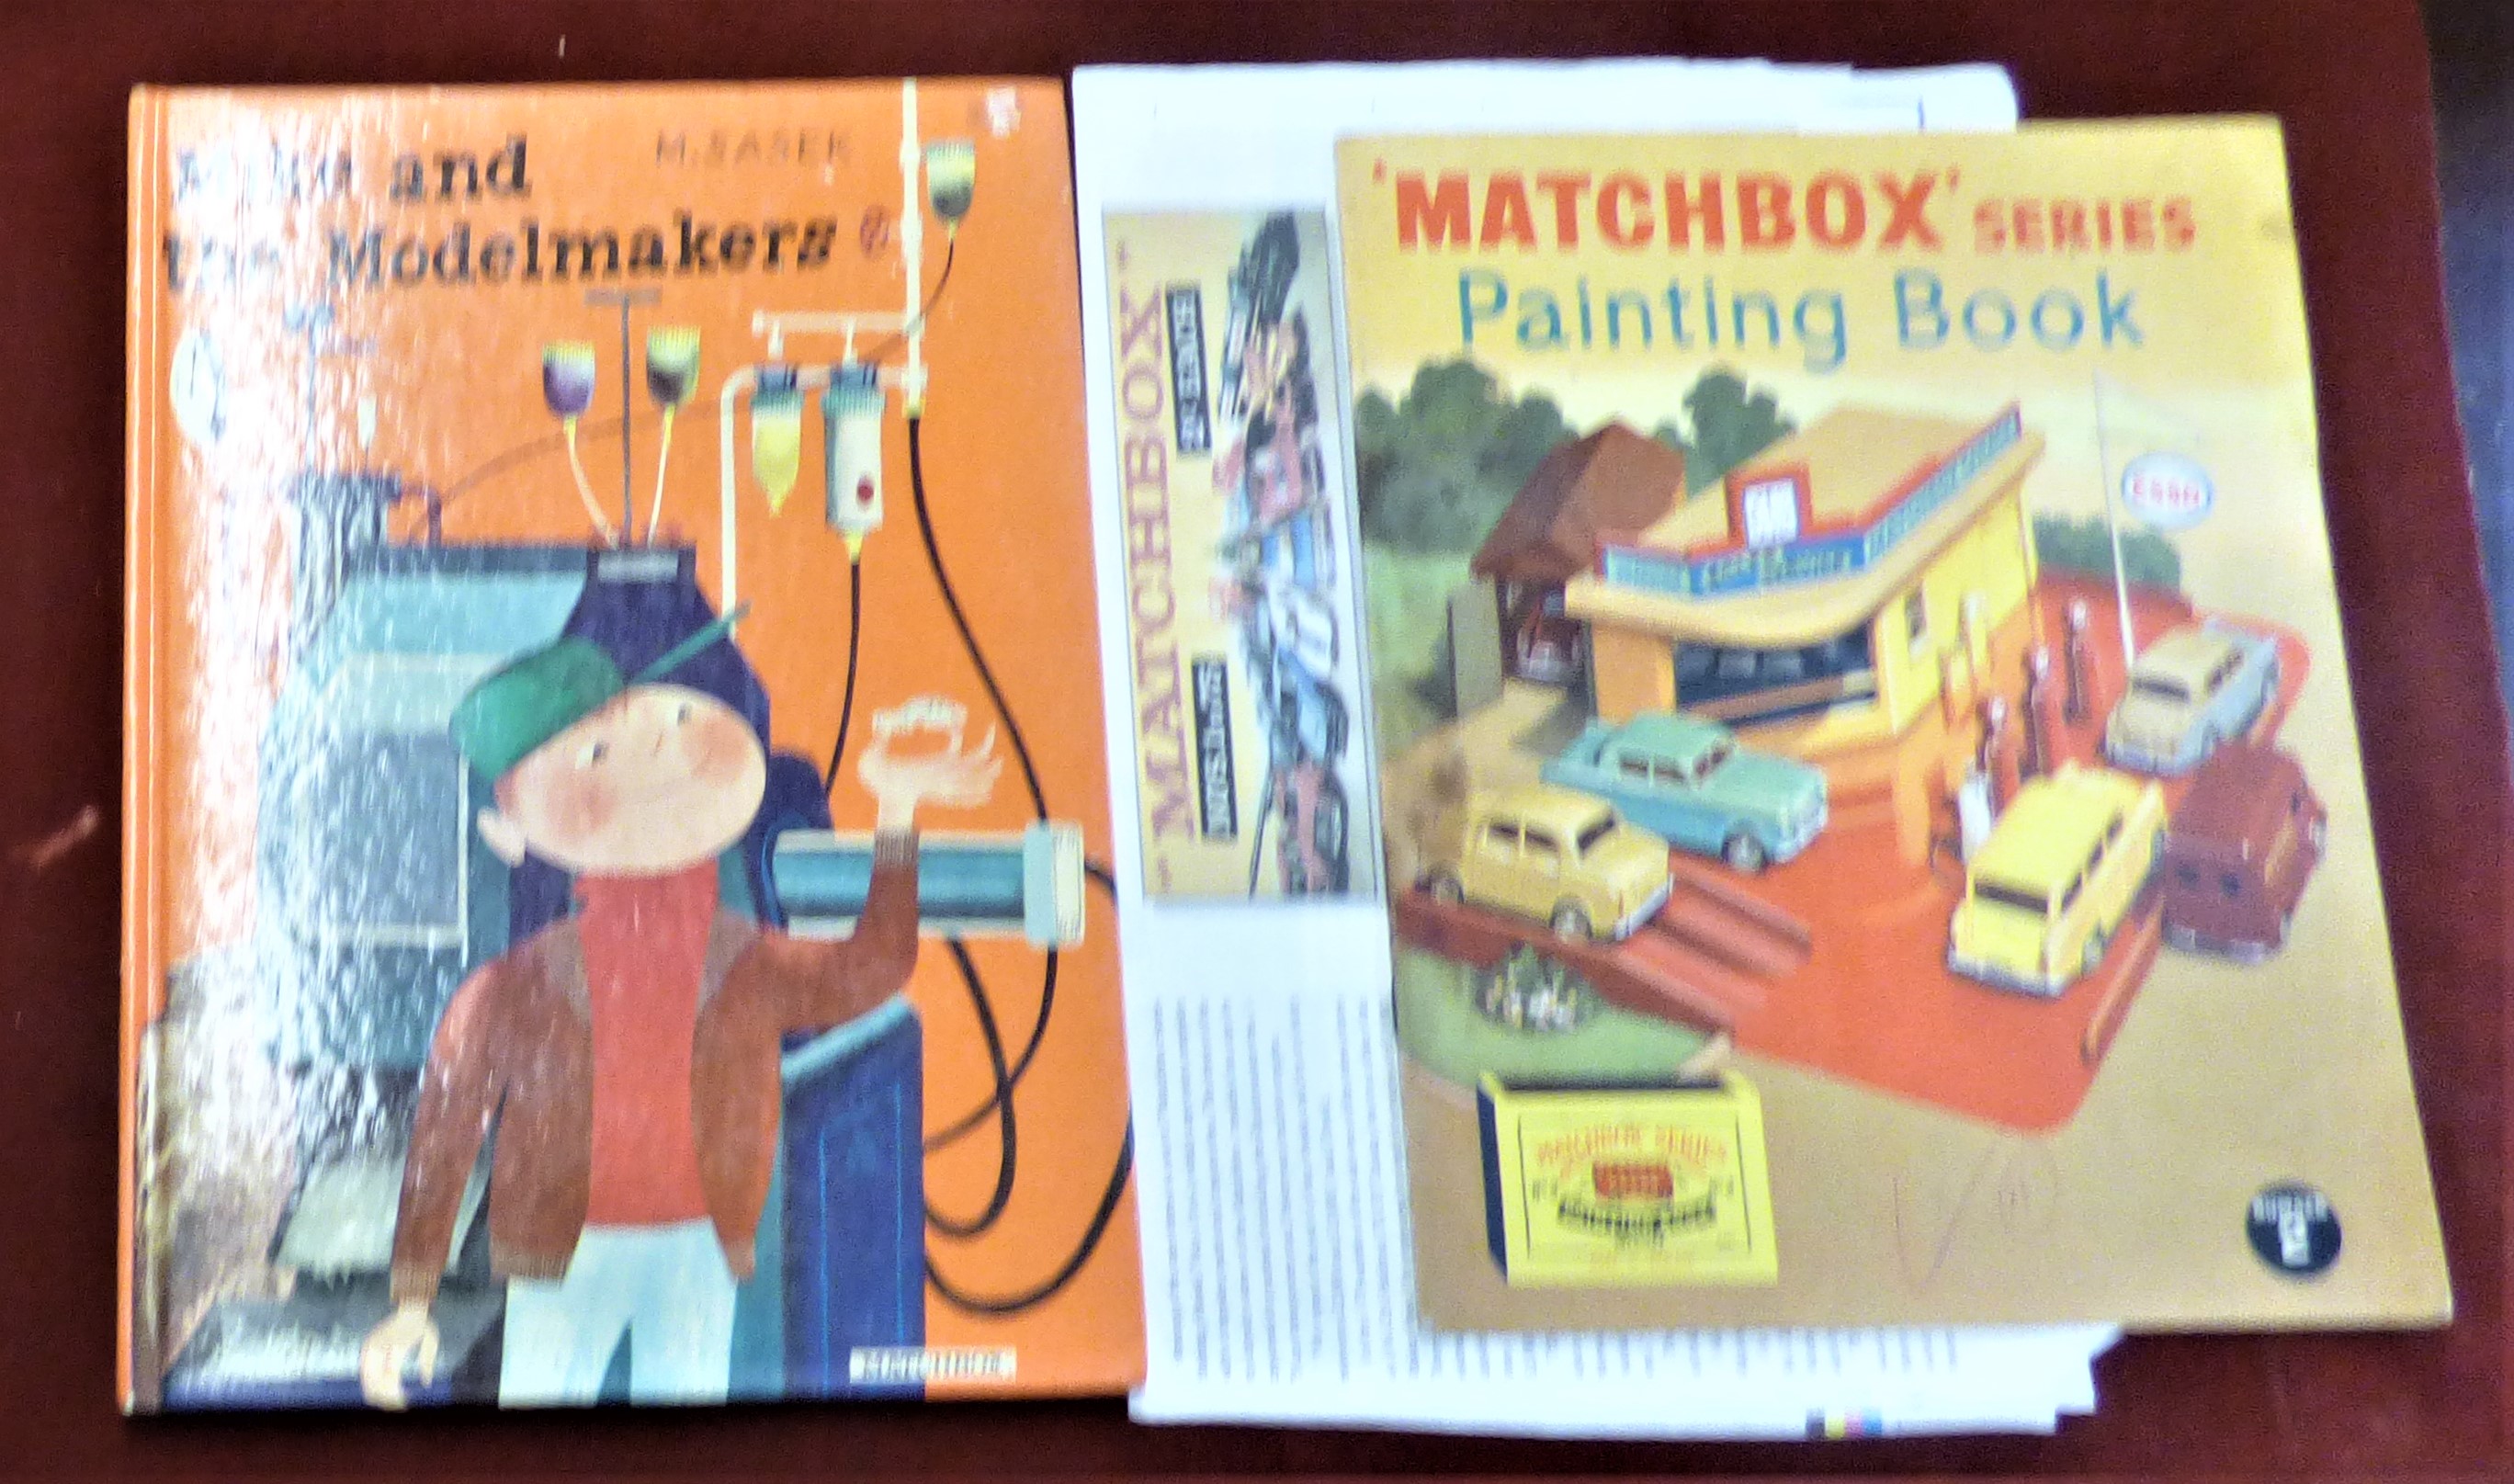 Matchbox Toys painting book No.2, very good condition and Mike and the Modelmaker hardback, the